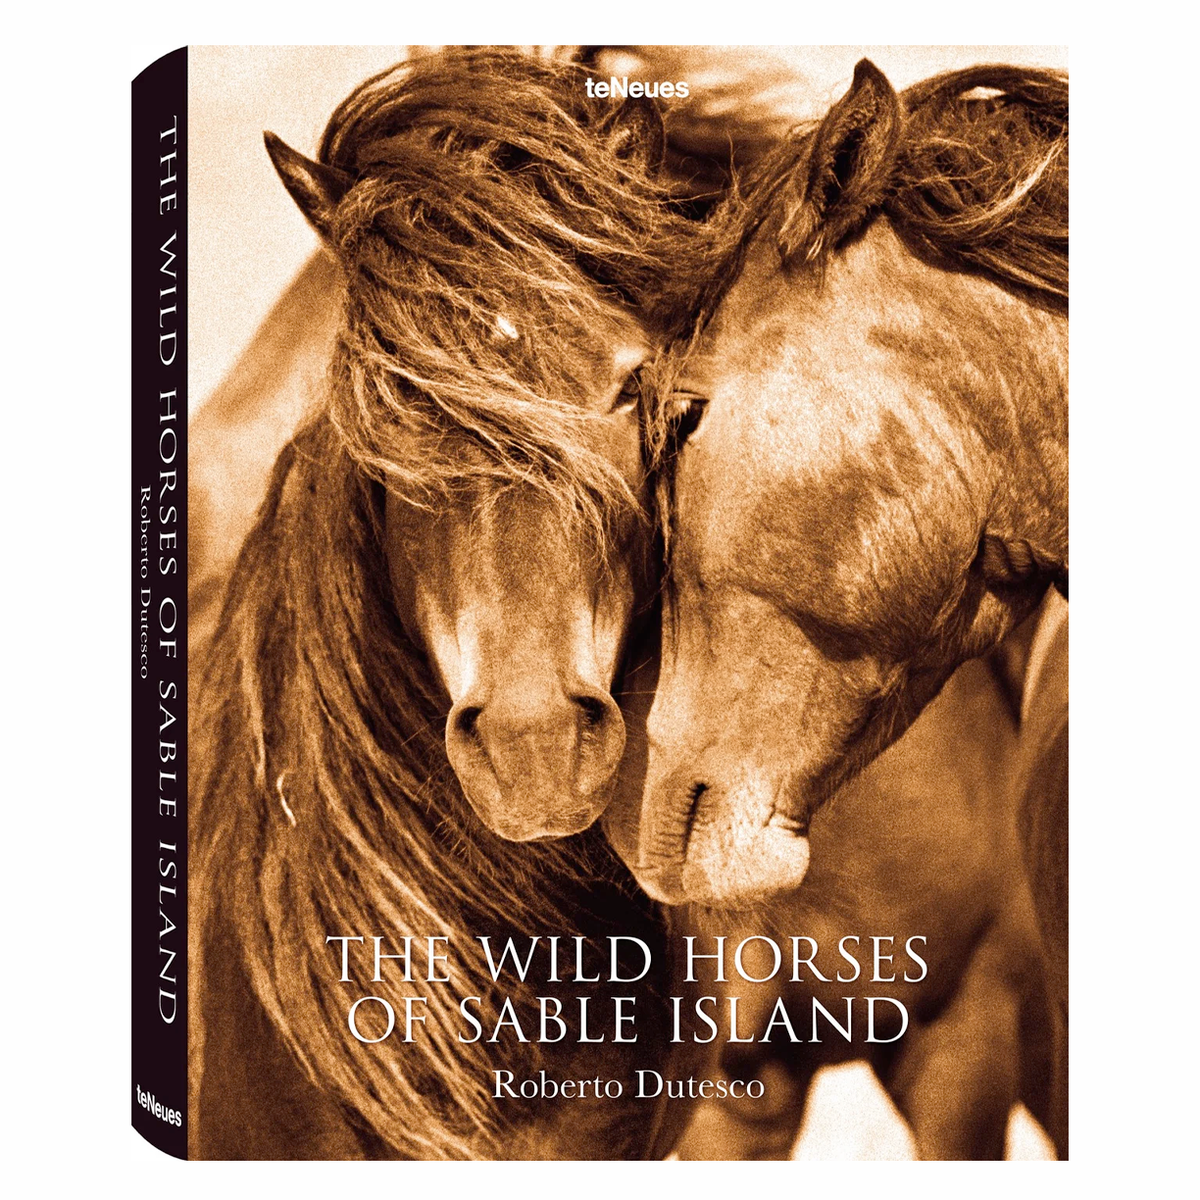 The Wild Horses of Sable Island, TENEUES - RSVP Style